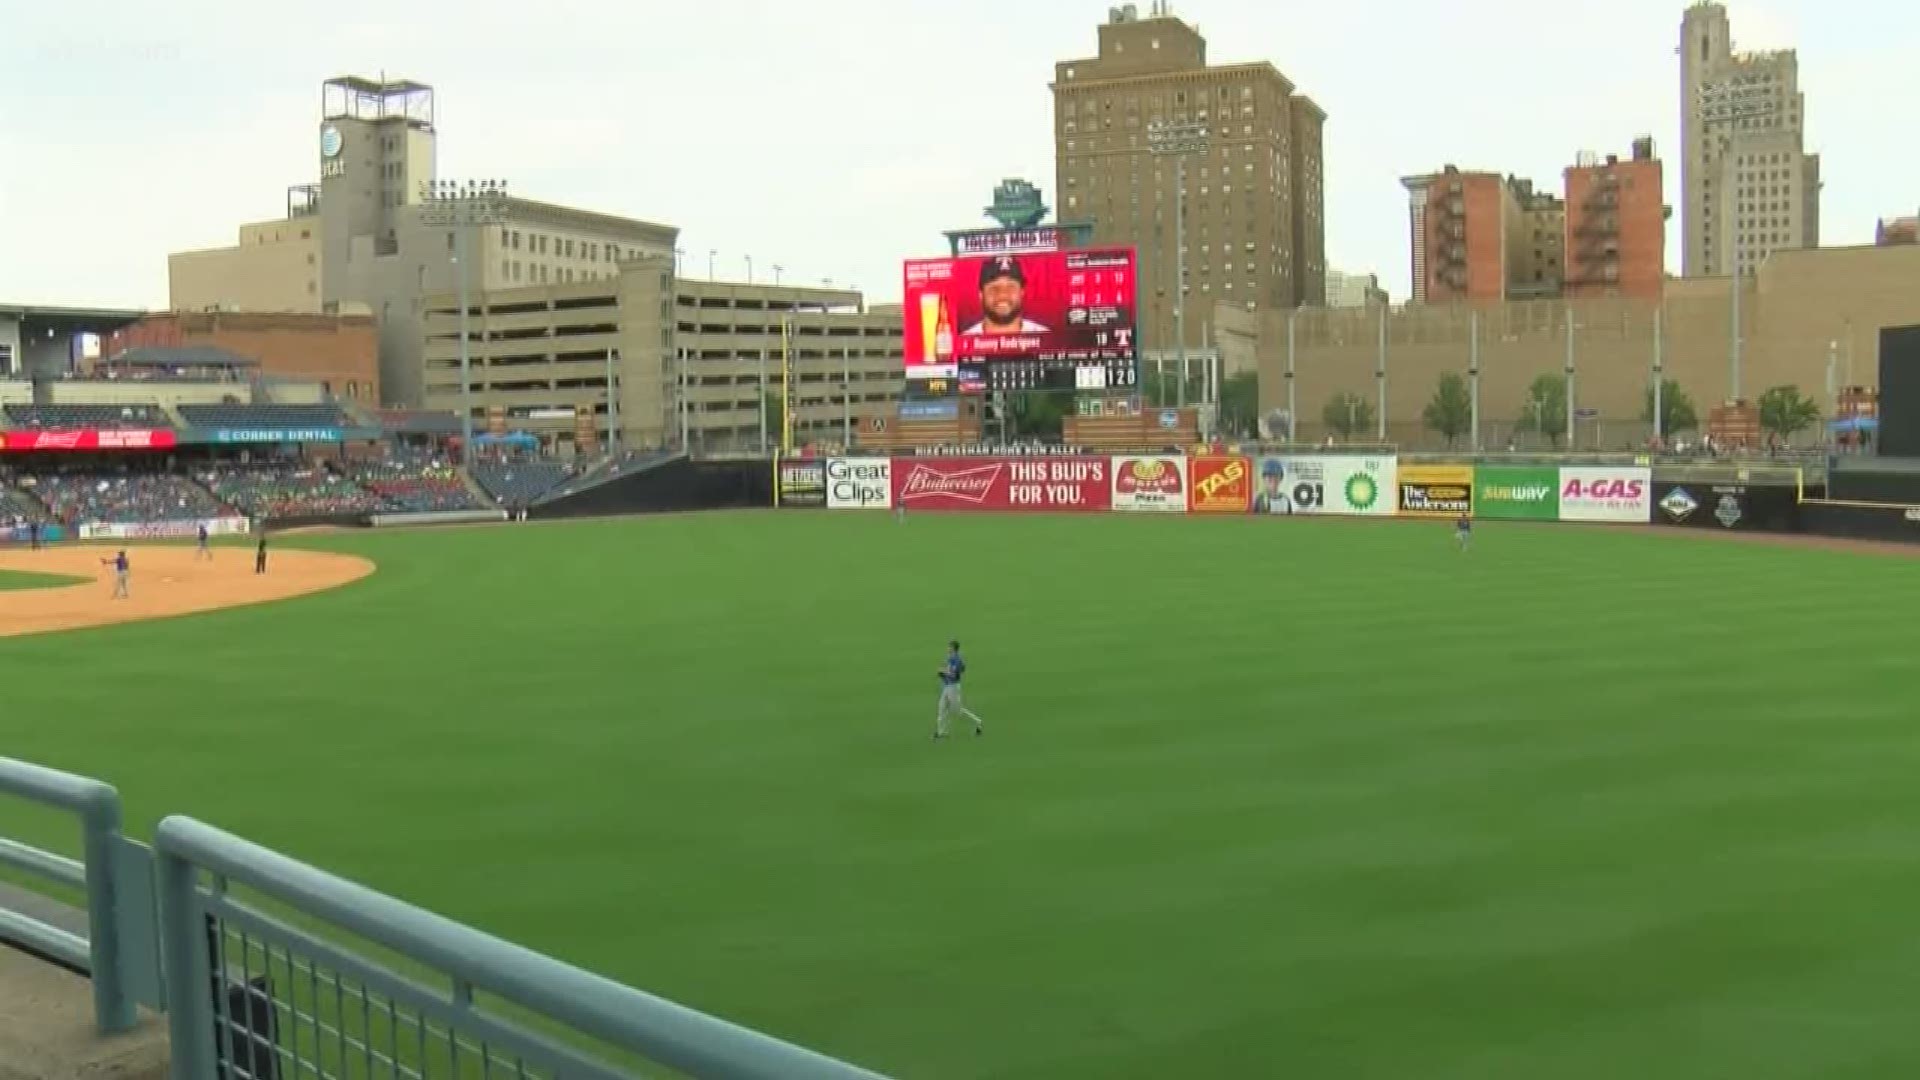 With near-100-degree temperatures this weekend, the Toledo Mud Hens are making sure fans are able to stay safe.